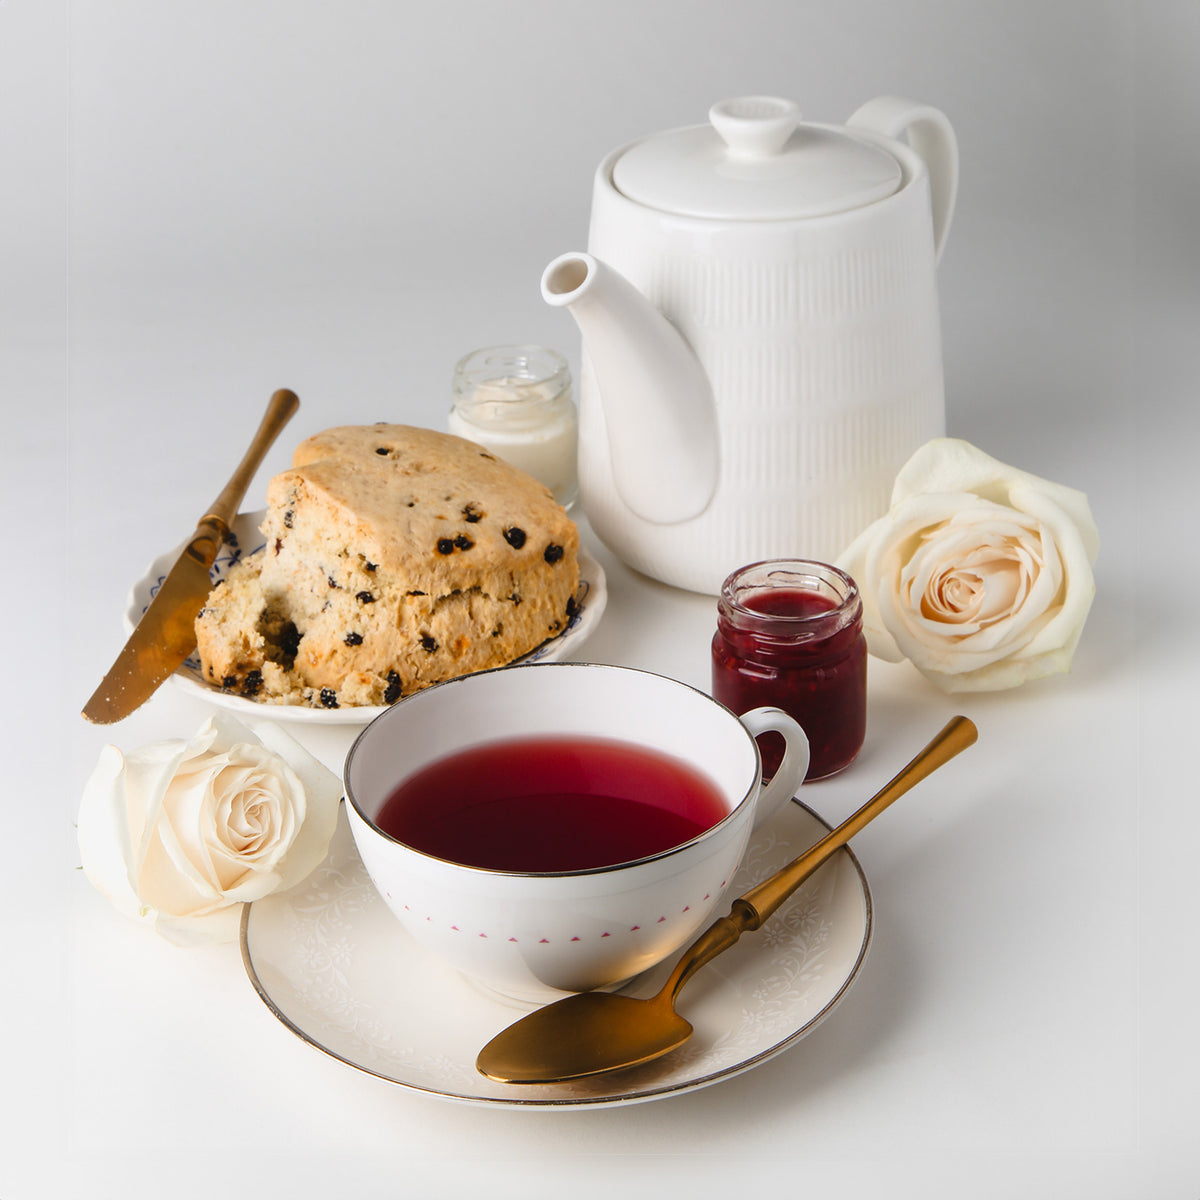 Caramel Berry Tea Time with a scone and jam